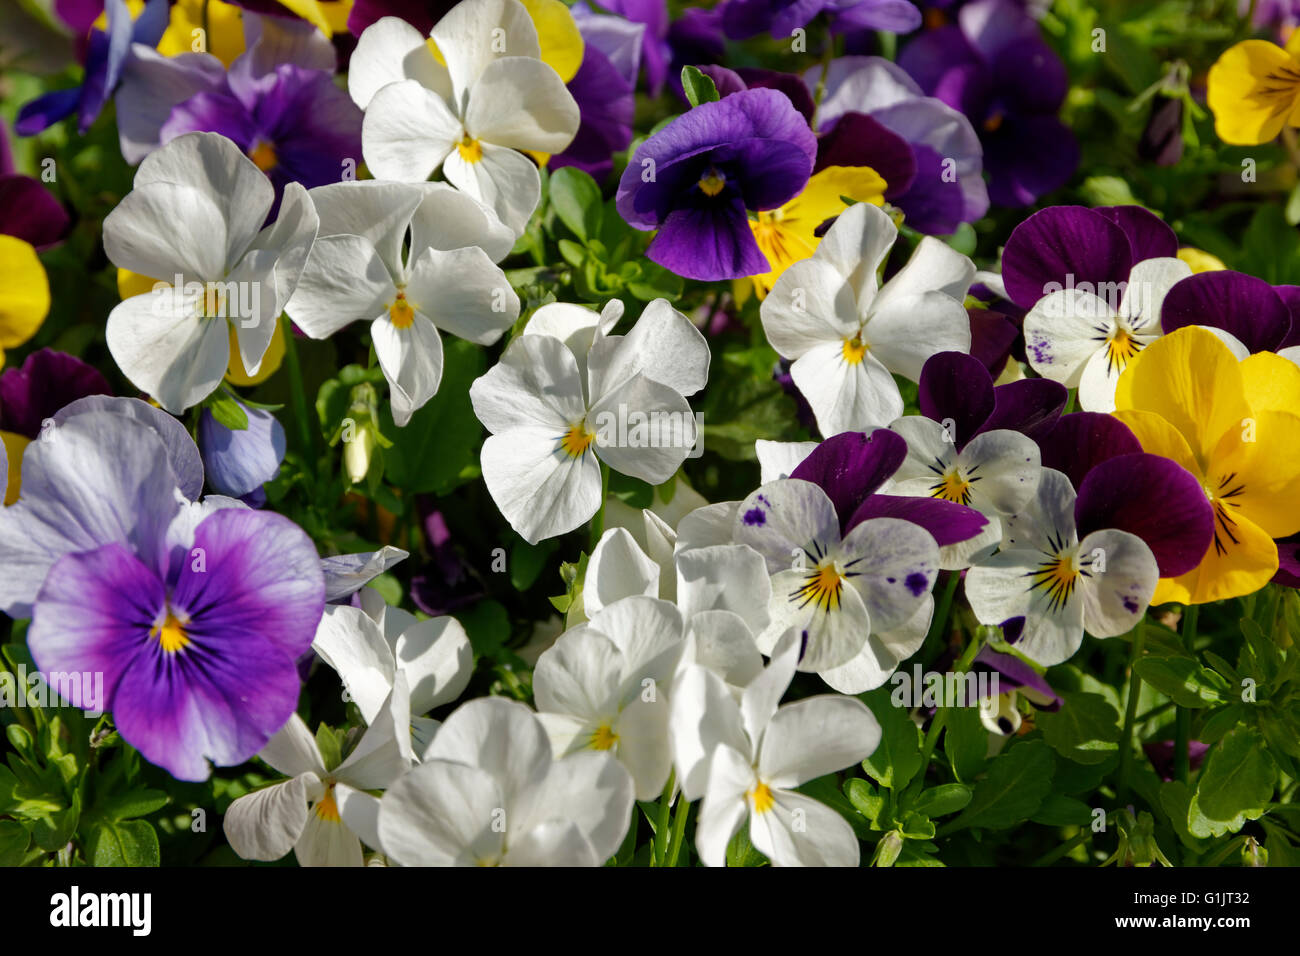 Mainly white pansies Stock Photo